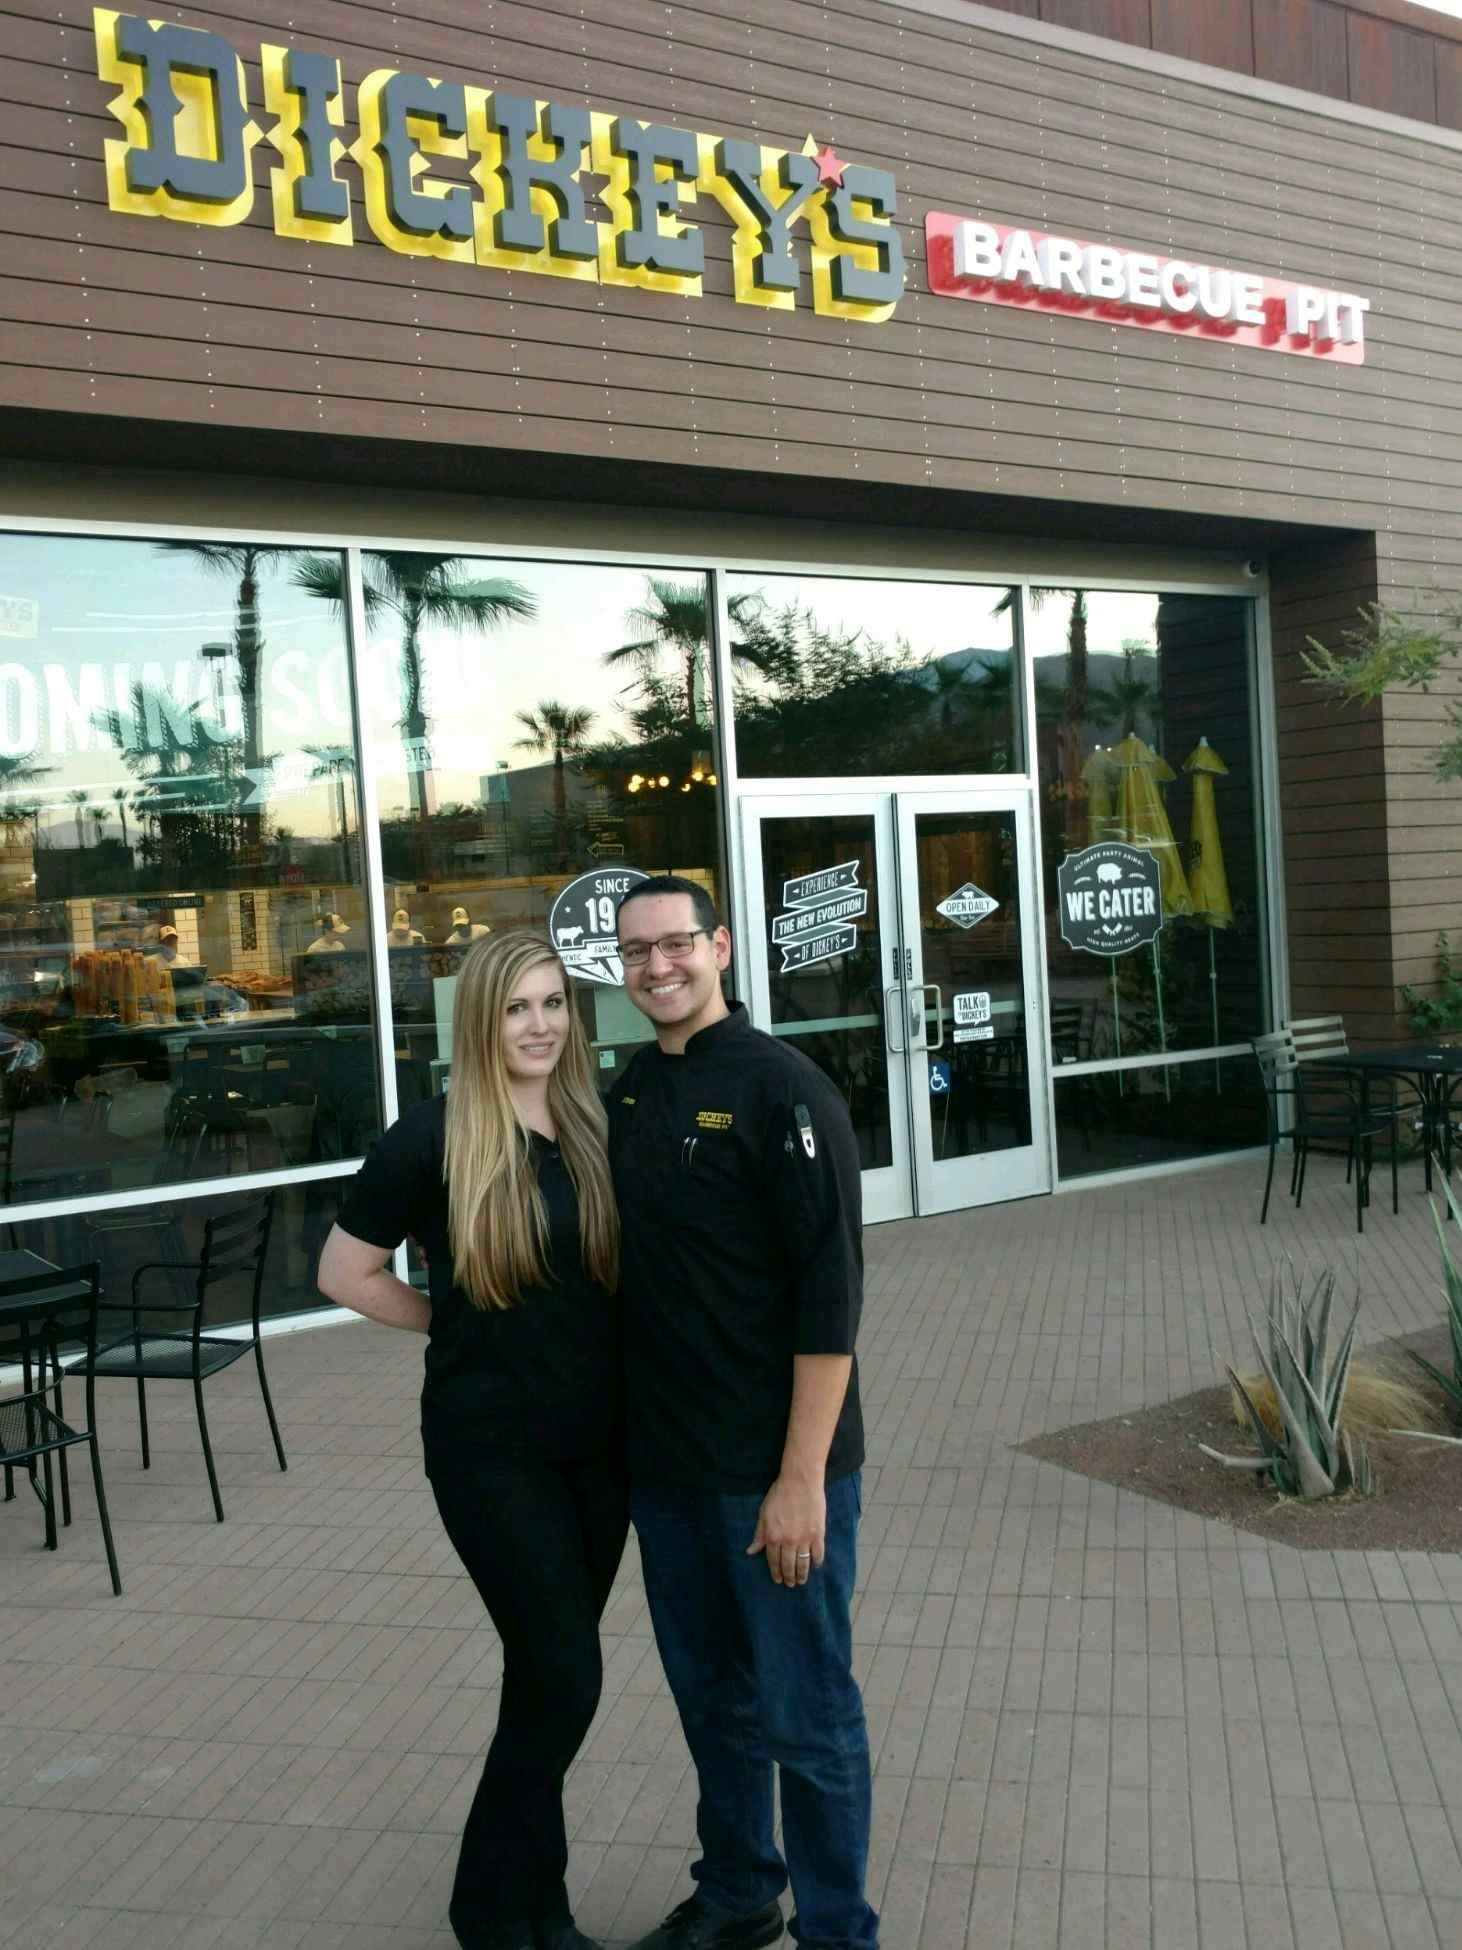 Dickey’s Barbecue Pit Brings Slow-Smoked Barbecue to Rancho Mirage